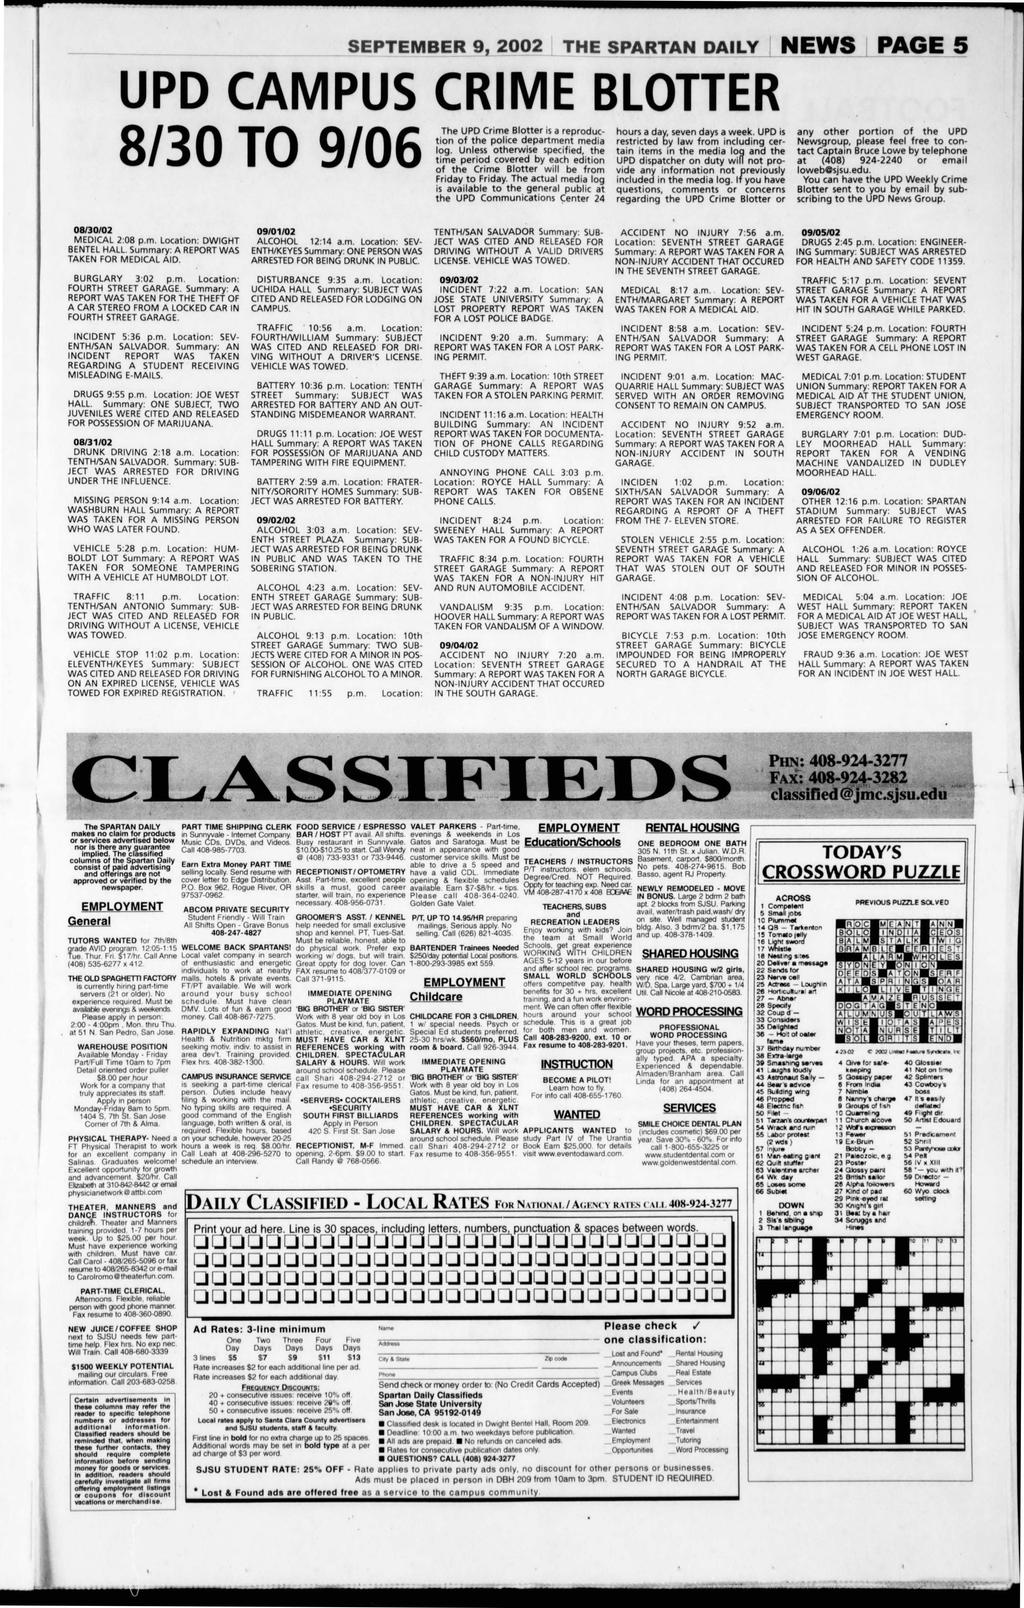 SEPTEMBER 9_ 2002 NEWS PAGE 5 UPD CAMPUS CRIME BLOTTER 8 The UPD Cime Blotte is a epoducoiogn oufn fehses poot Itilcee wdies ep a s tpme 7i f te dm etdhi ae of the Cime Blotte will be fom Fiday Fiday.